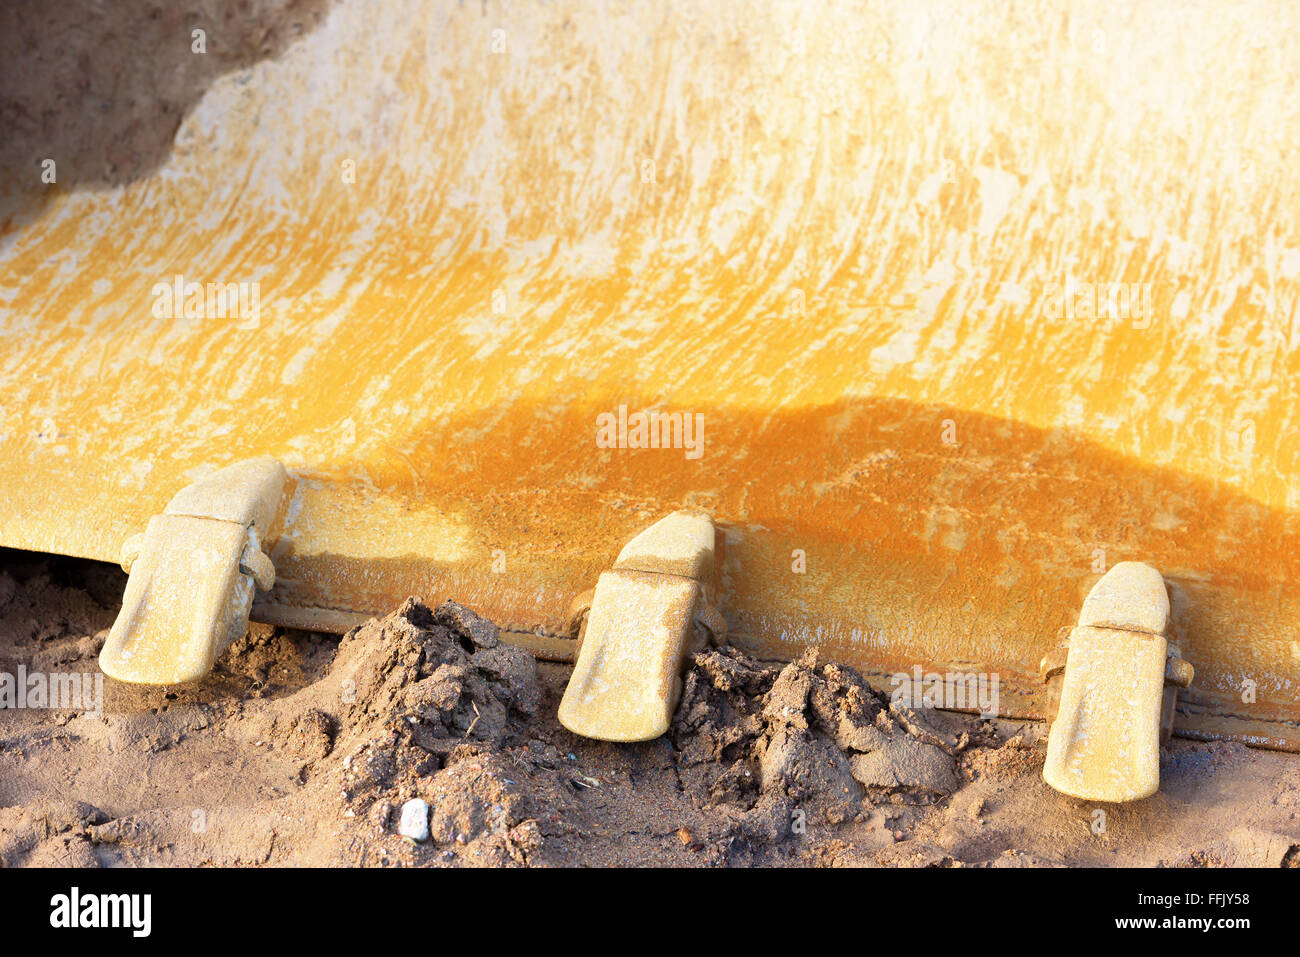 Close up detail of a front loader bucket or scoop. Ground is wet and muddy. Scoop is rusty and well used. Stock Photo